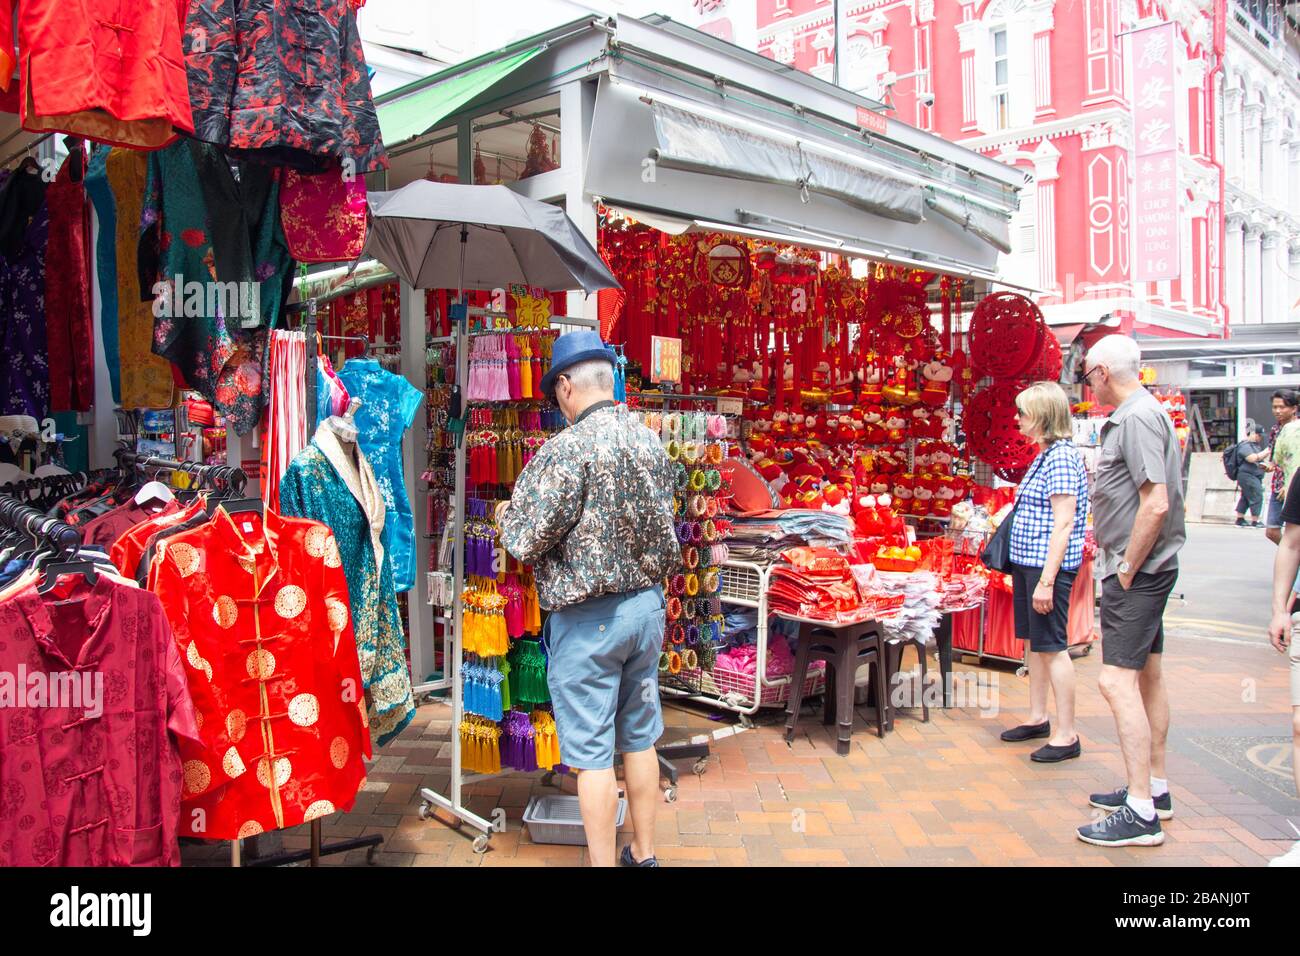 Chinese clothing and souvenir shops, Smith Street, Chinatown, Central Area, Republic of Singapore Stock Photo